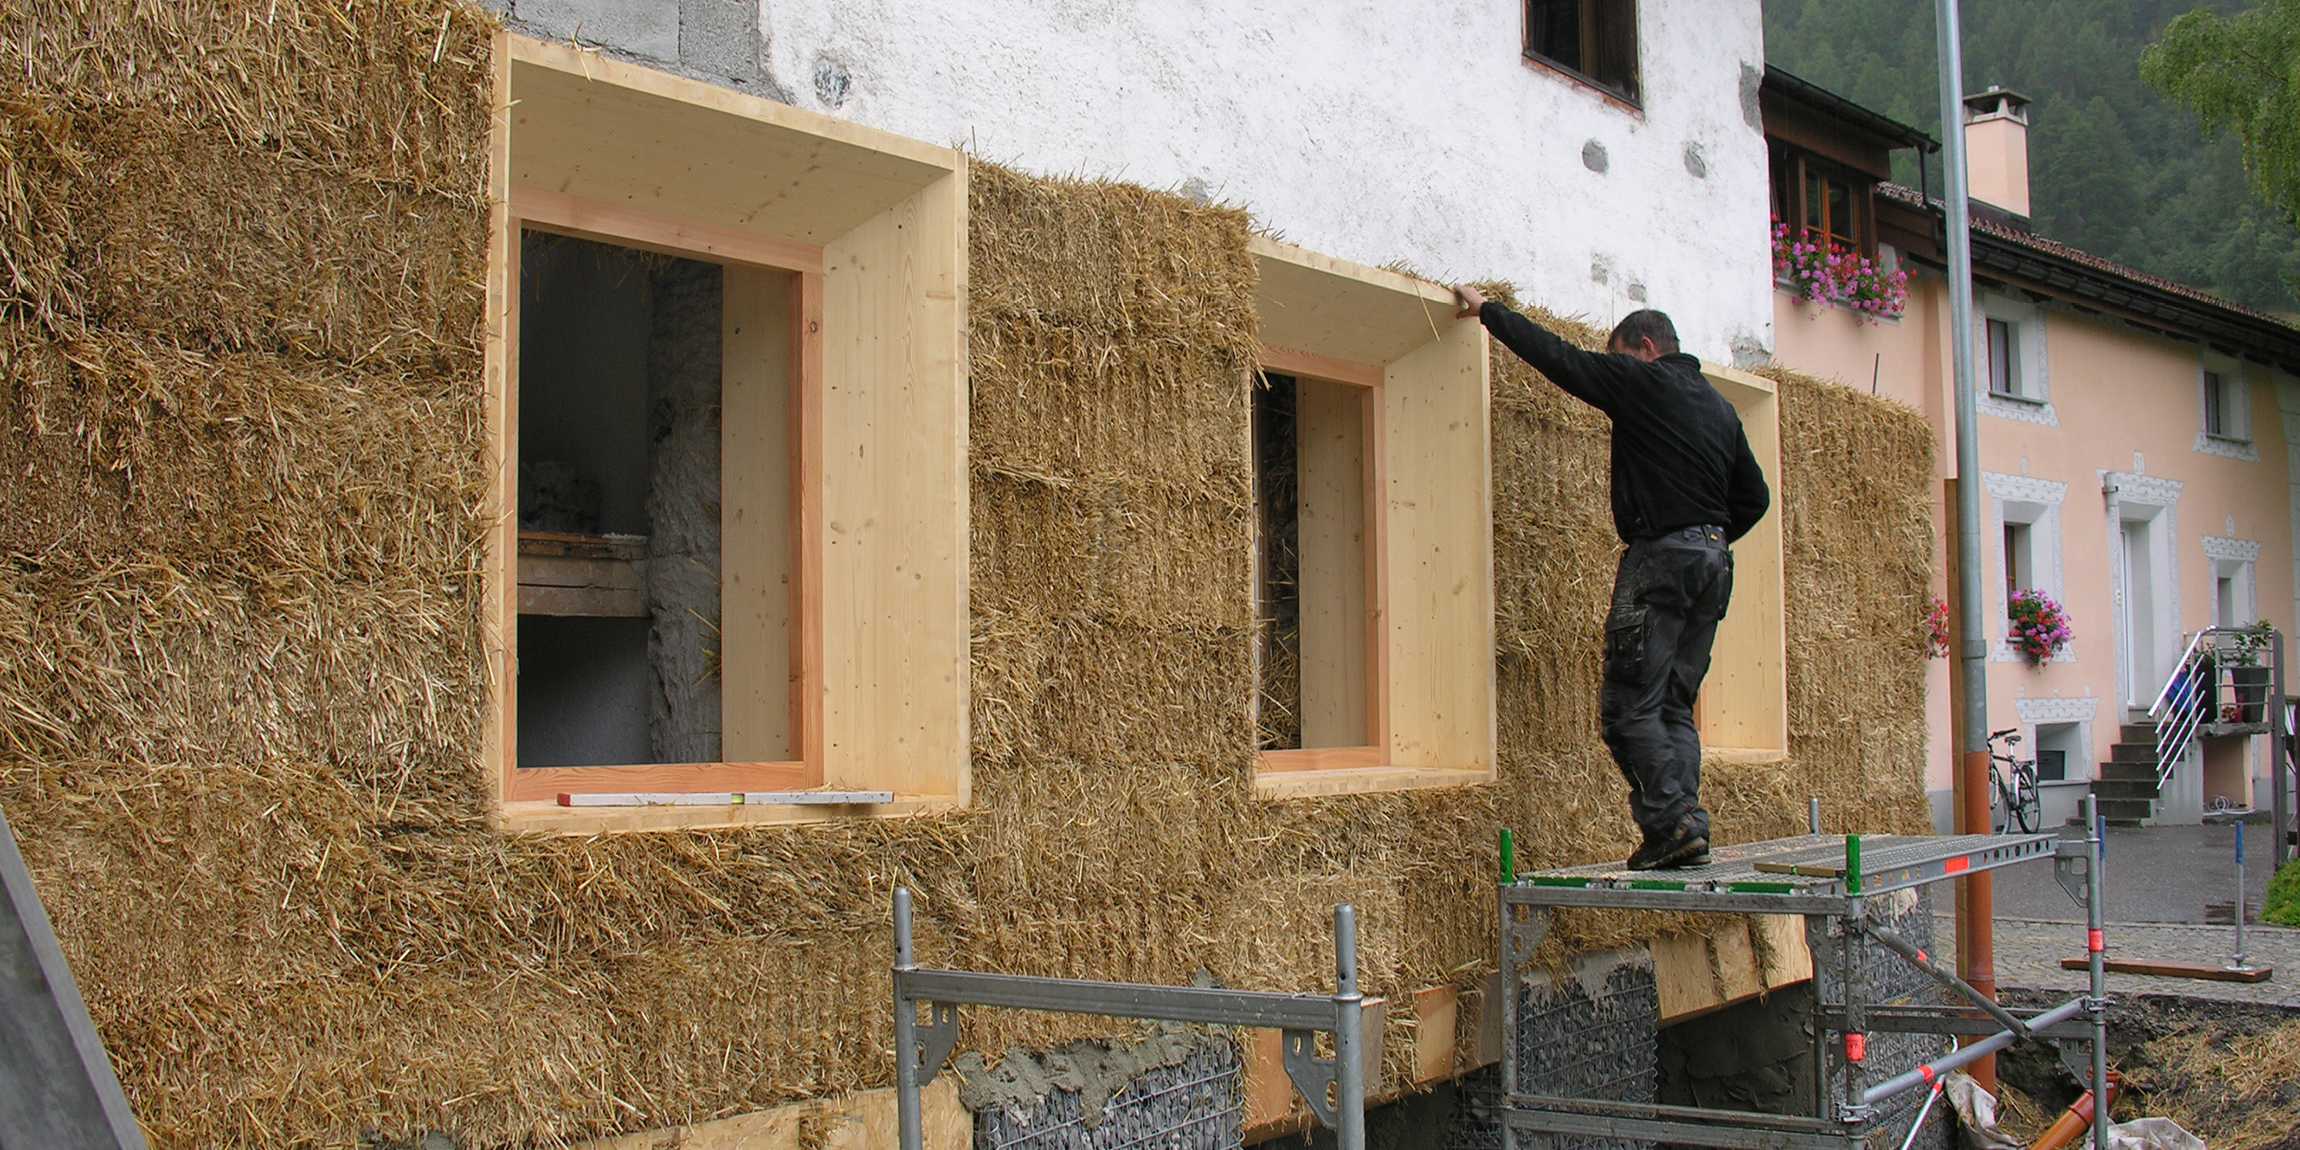 A man works on a house facade with straw.